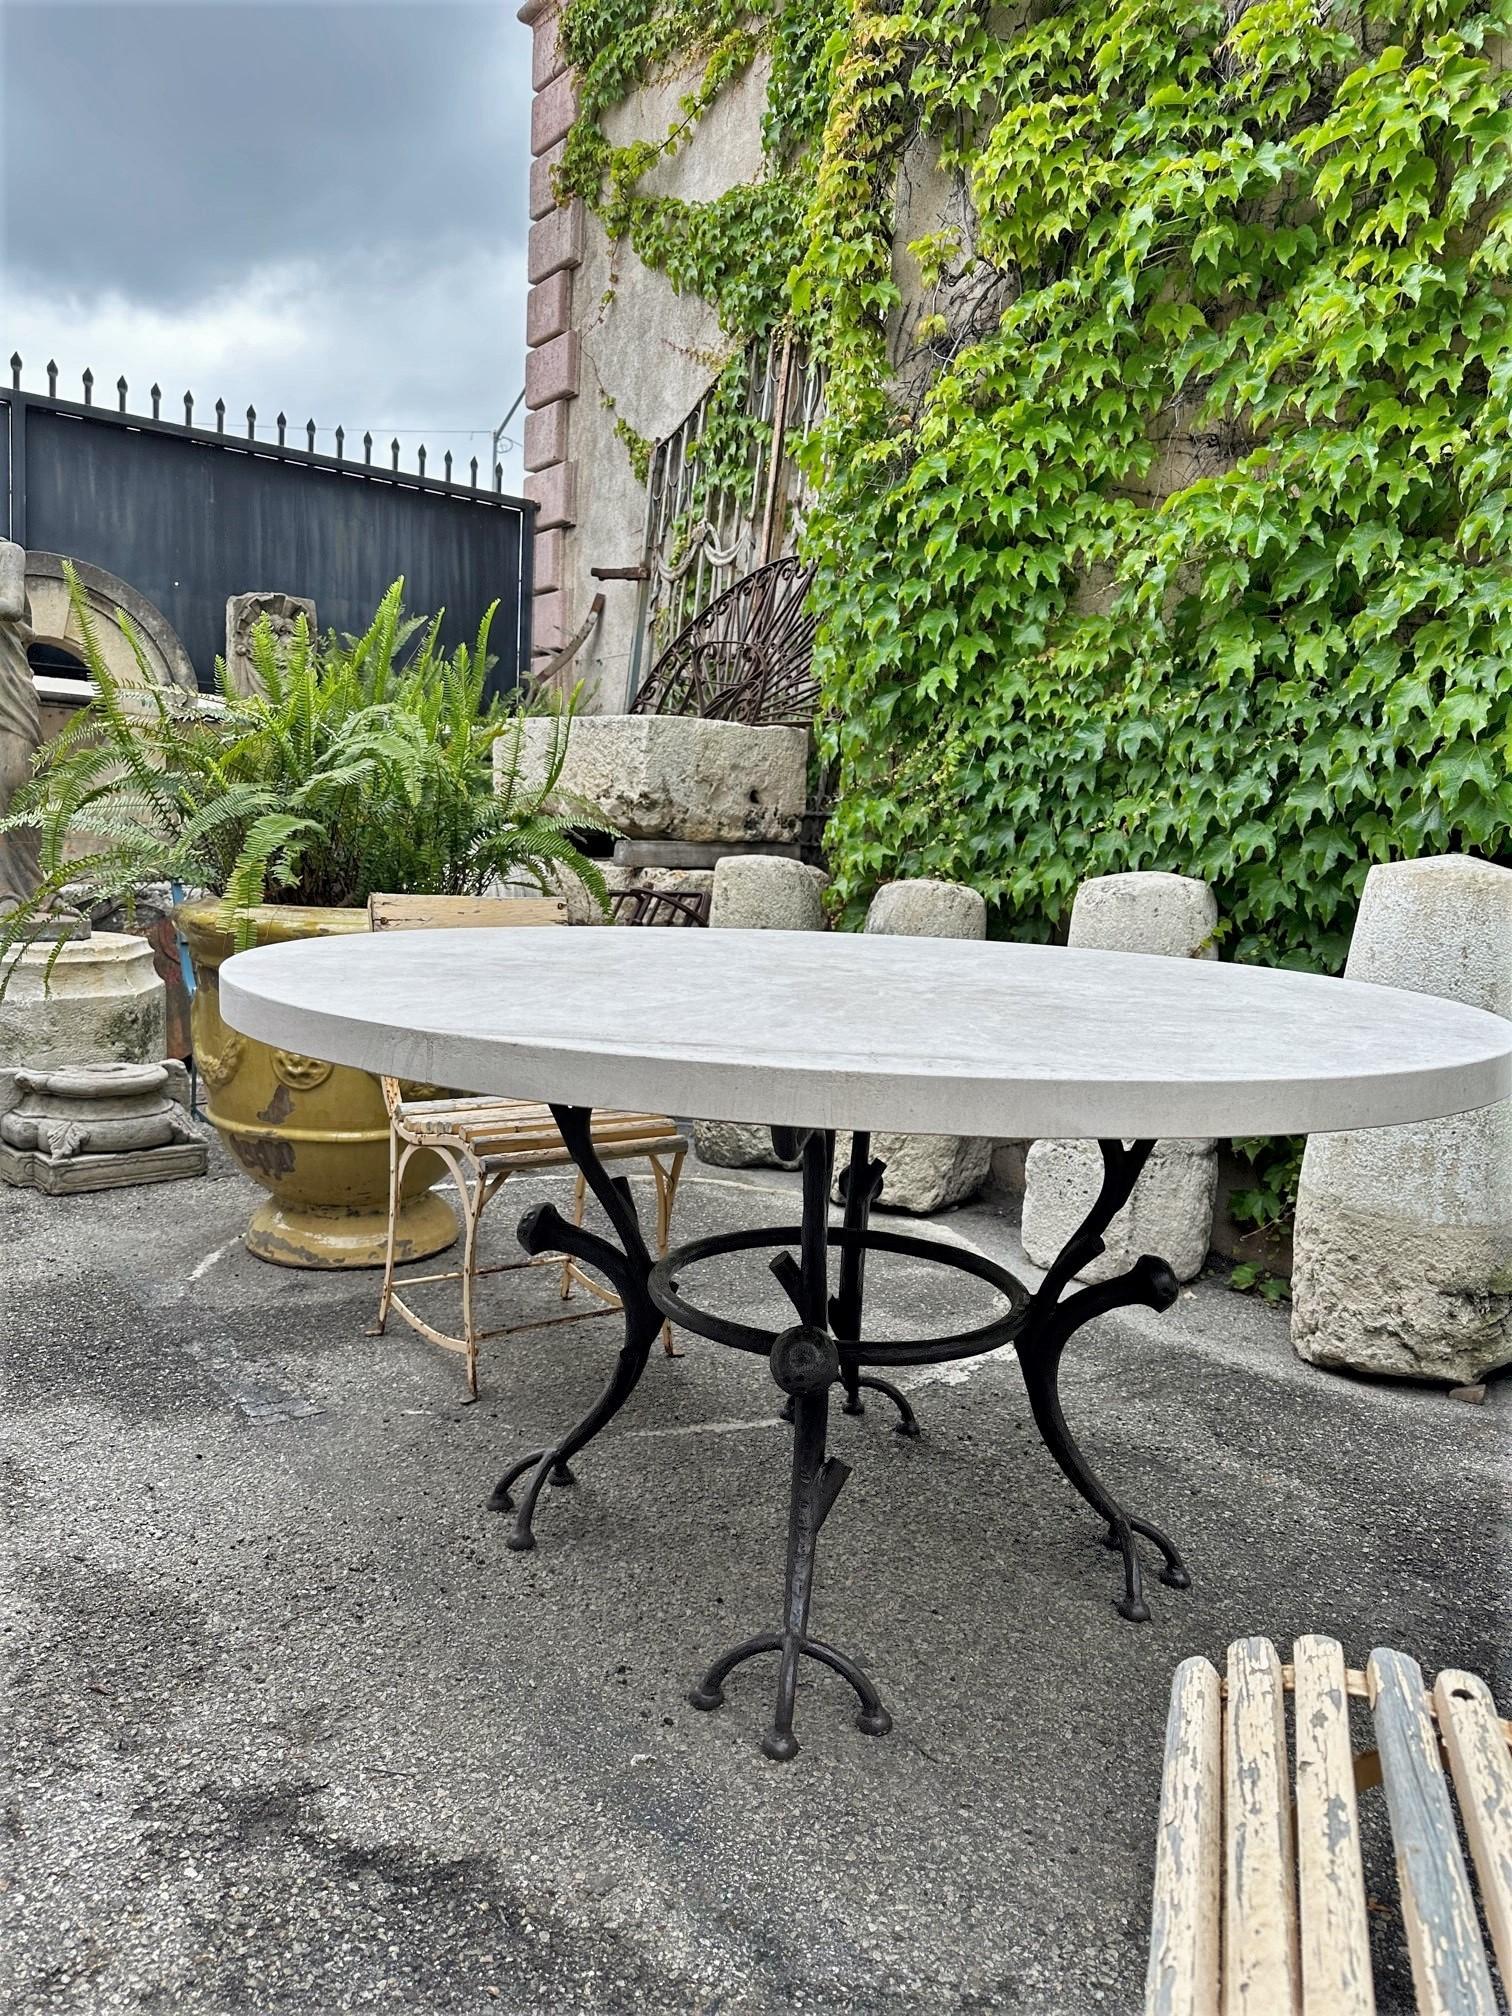 Large Round Carved Stone & Iron Garden Patio Dining Table Giacometti Style LA CA, For 8 people. Hand Crafted and carved round stone garden patio coffee outdoor indoor table for EIGHT people or more. It will be the perfect touch by an outdoor